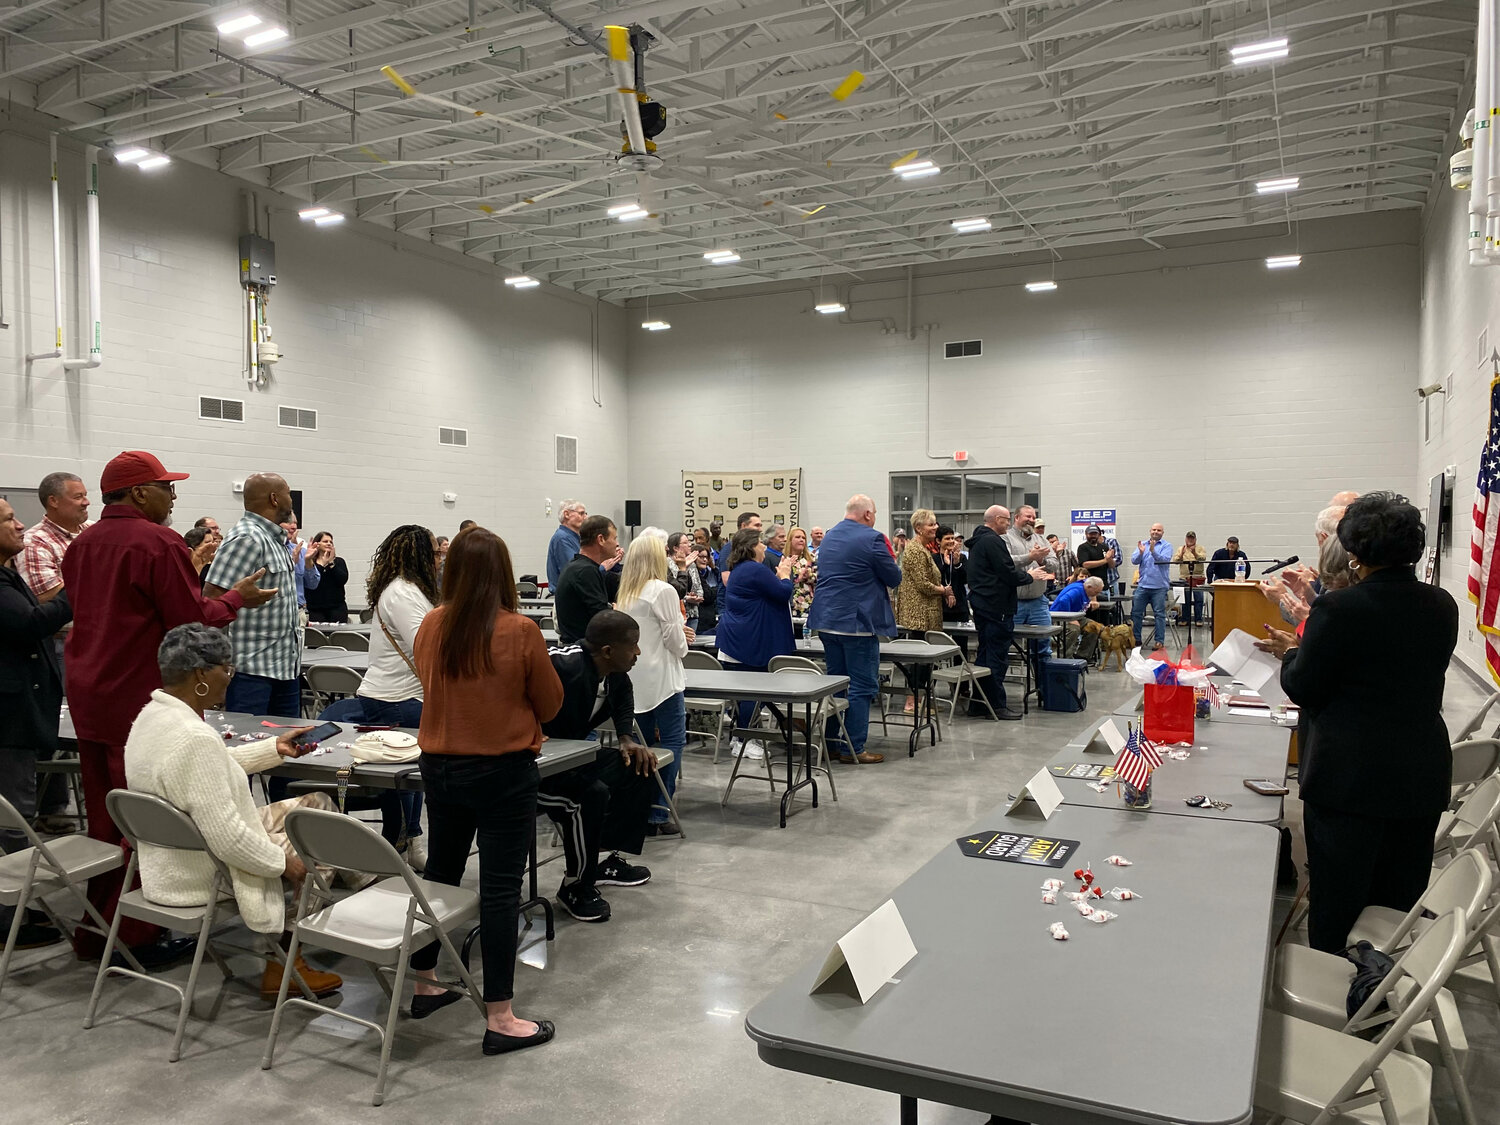 Members of Company C of the 711 Signal Battalion who were deployed to Iraq in 2004 held a 20-year reunion Saturday, Jan. 27 at the Foley National Guard armory.